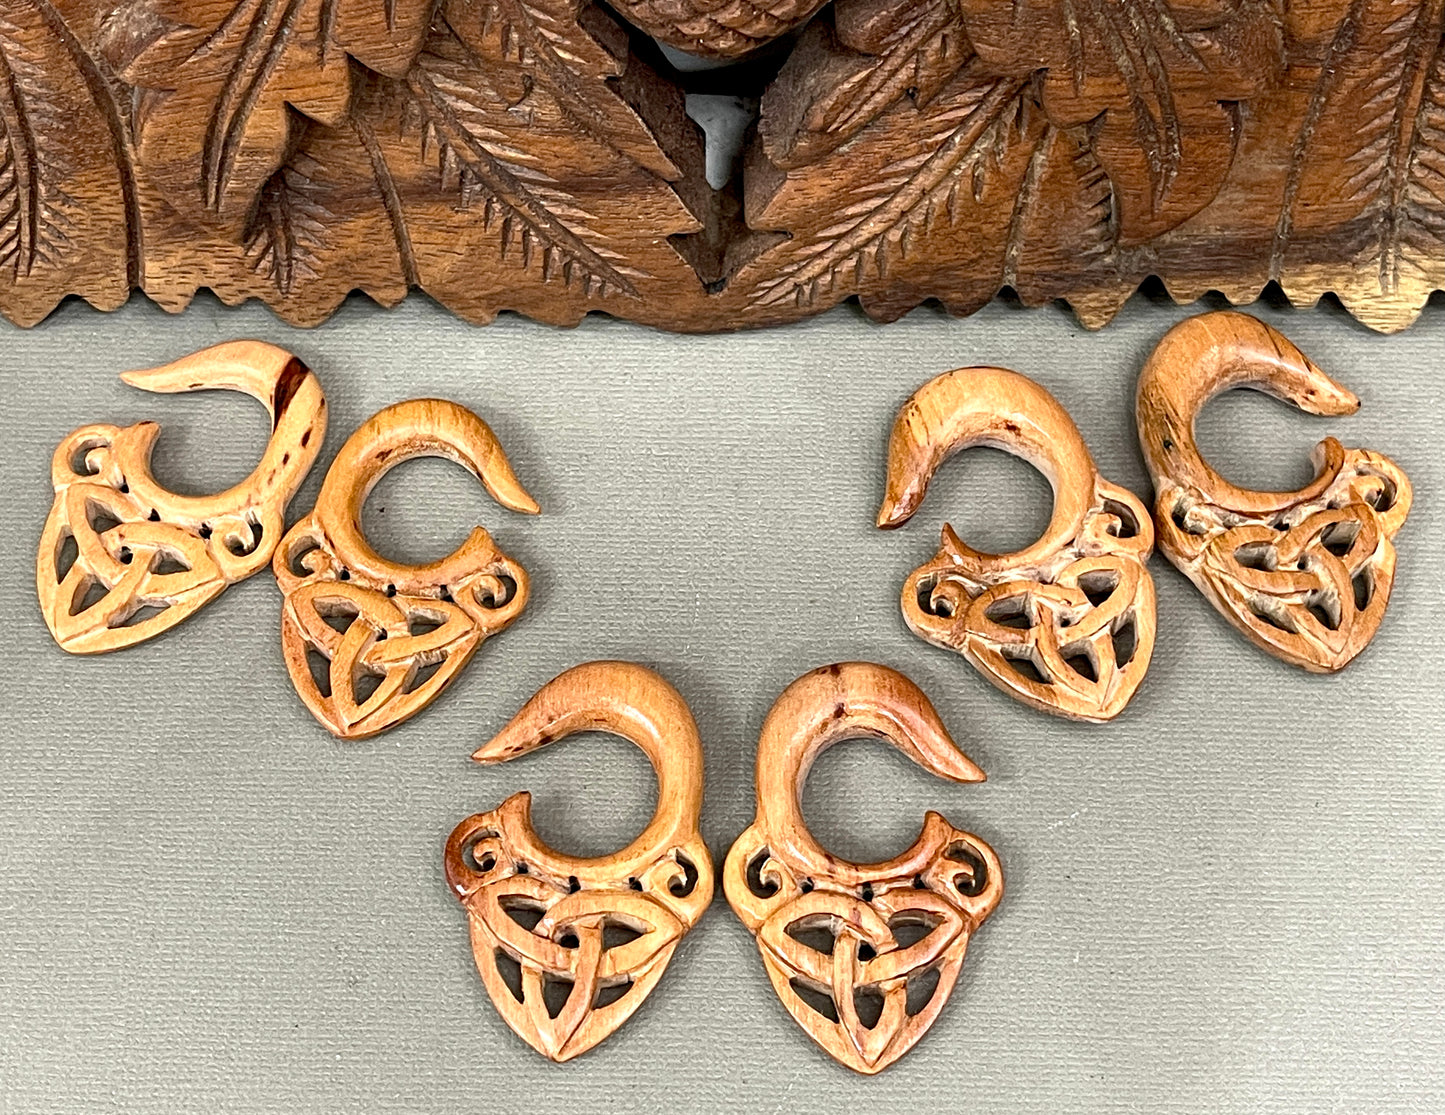 Celtic Knot Gauged Earrings - Available in 0-1/2"